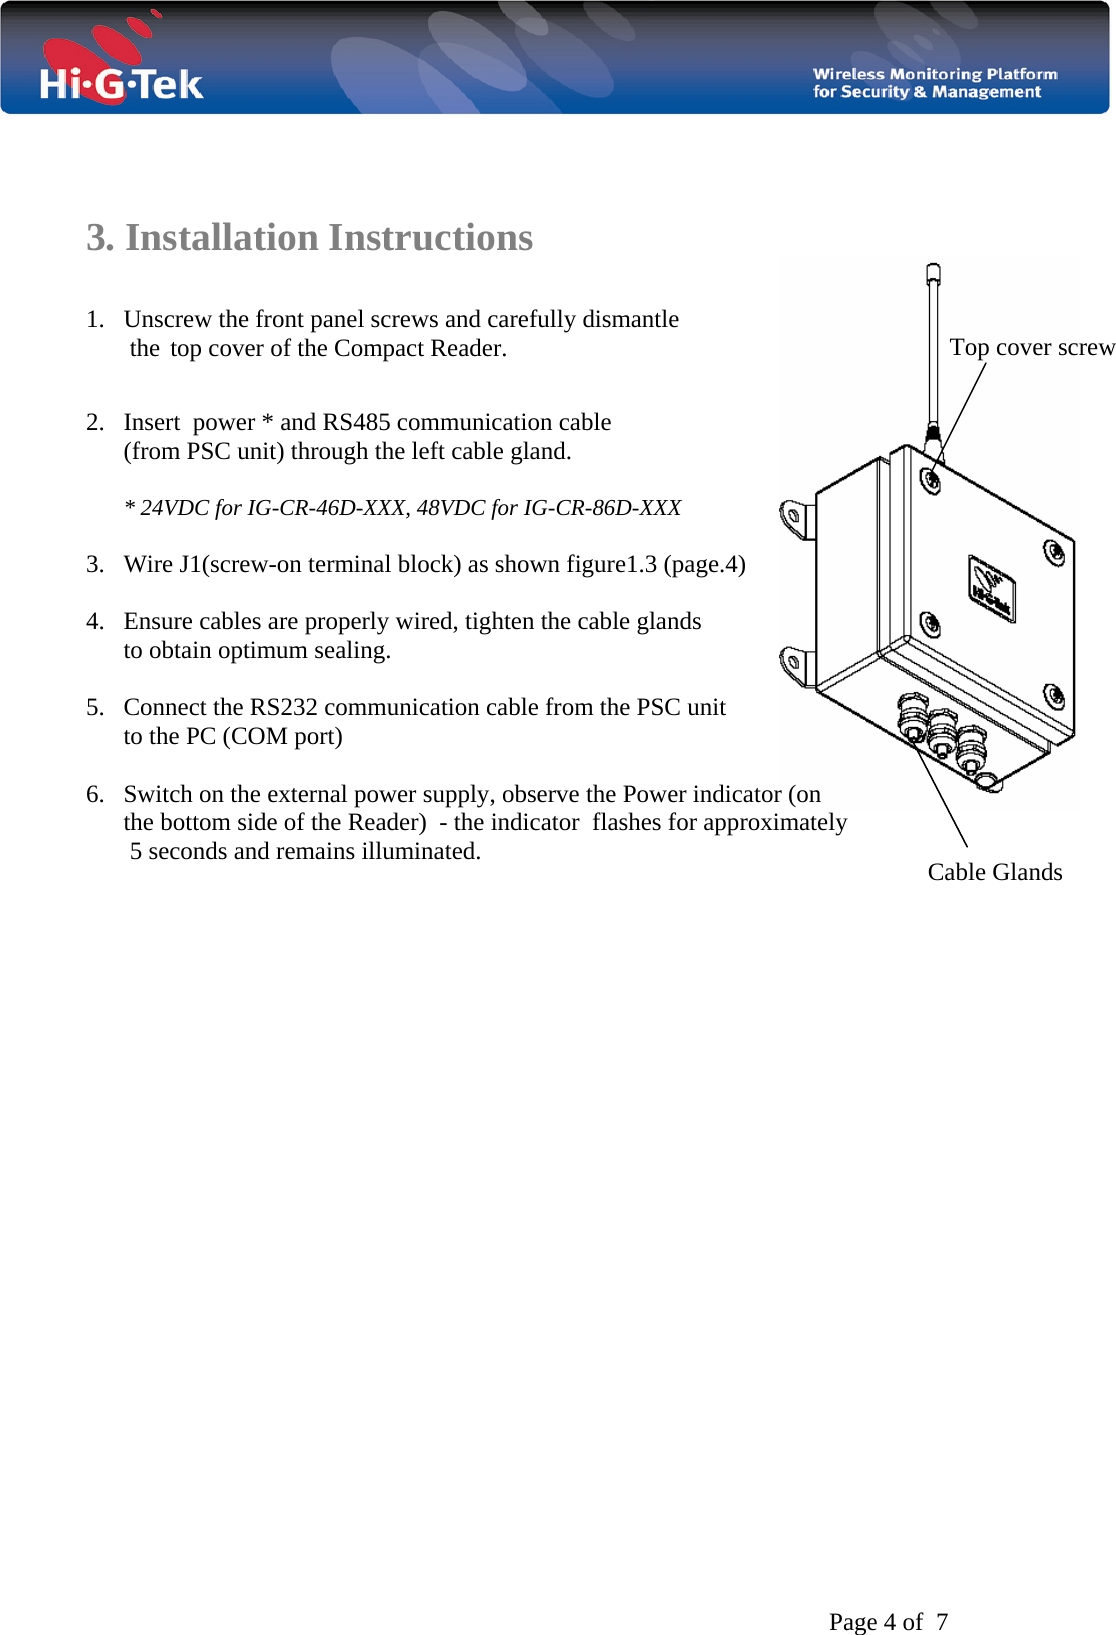   Page 4 of  7   3. Installation Instructions  1. Unscrew the front panel screws and carefully dismantle        the top cover of the Compact Reader.  2. Insert  power * and RS485 communication cable        (from PSC unit) through the left cable gland.  * 24VDC for IG-CR-46D-XXX, 48VDC for IG-CR-86D-XXX  3. Wire J1(screw-on terminal block) as shown figure1.3 (page.4)  4. Ensure cables are properly wired, tighten the cable glands to obtain optimum sealing.  5. Connect the RS232 communication cable from the PSC unit       to the PC (COM port)  6. Switch on the external power supply, observe the Power indicator (on       the bottom side of the Reader)  - the indicator  flashes for approximately        5 seconds and remains illuminated.                                    Top cover screw     Cable Glands  